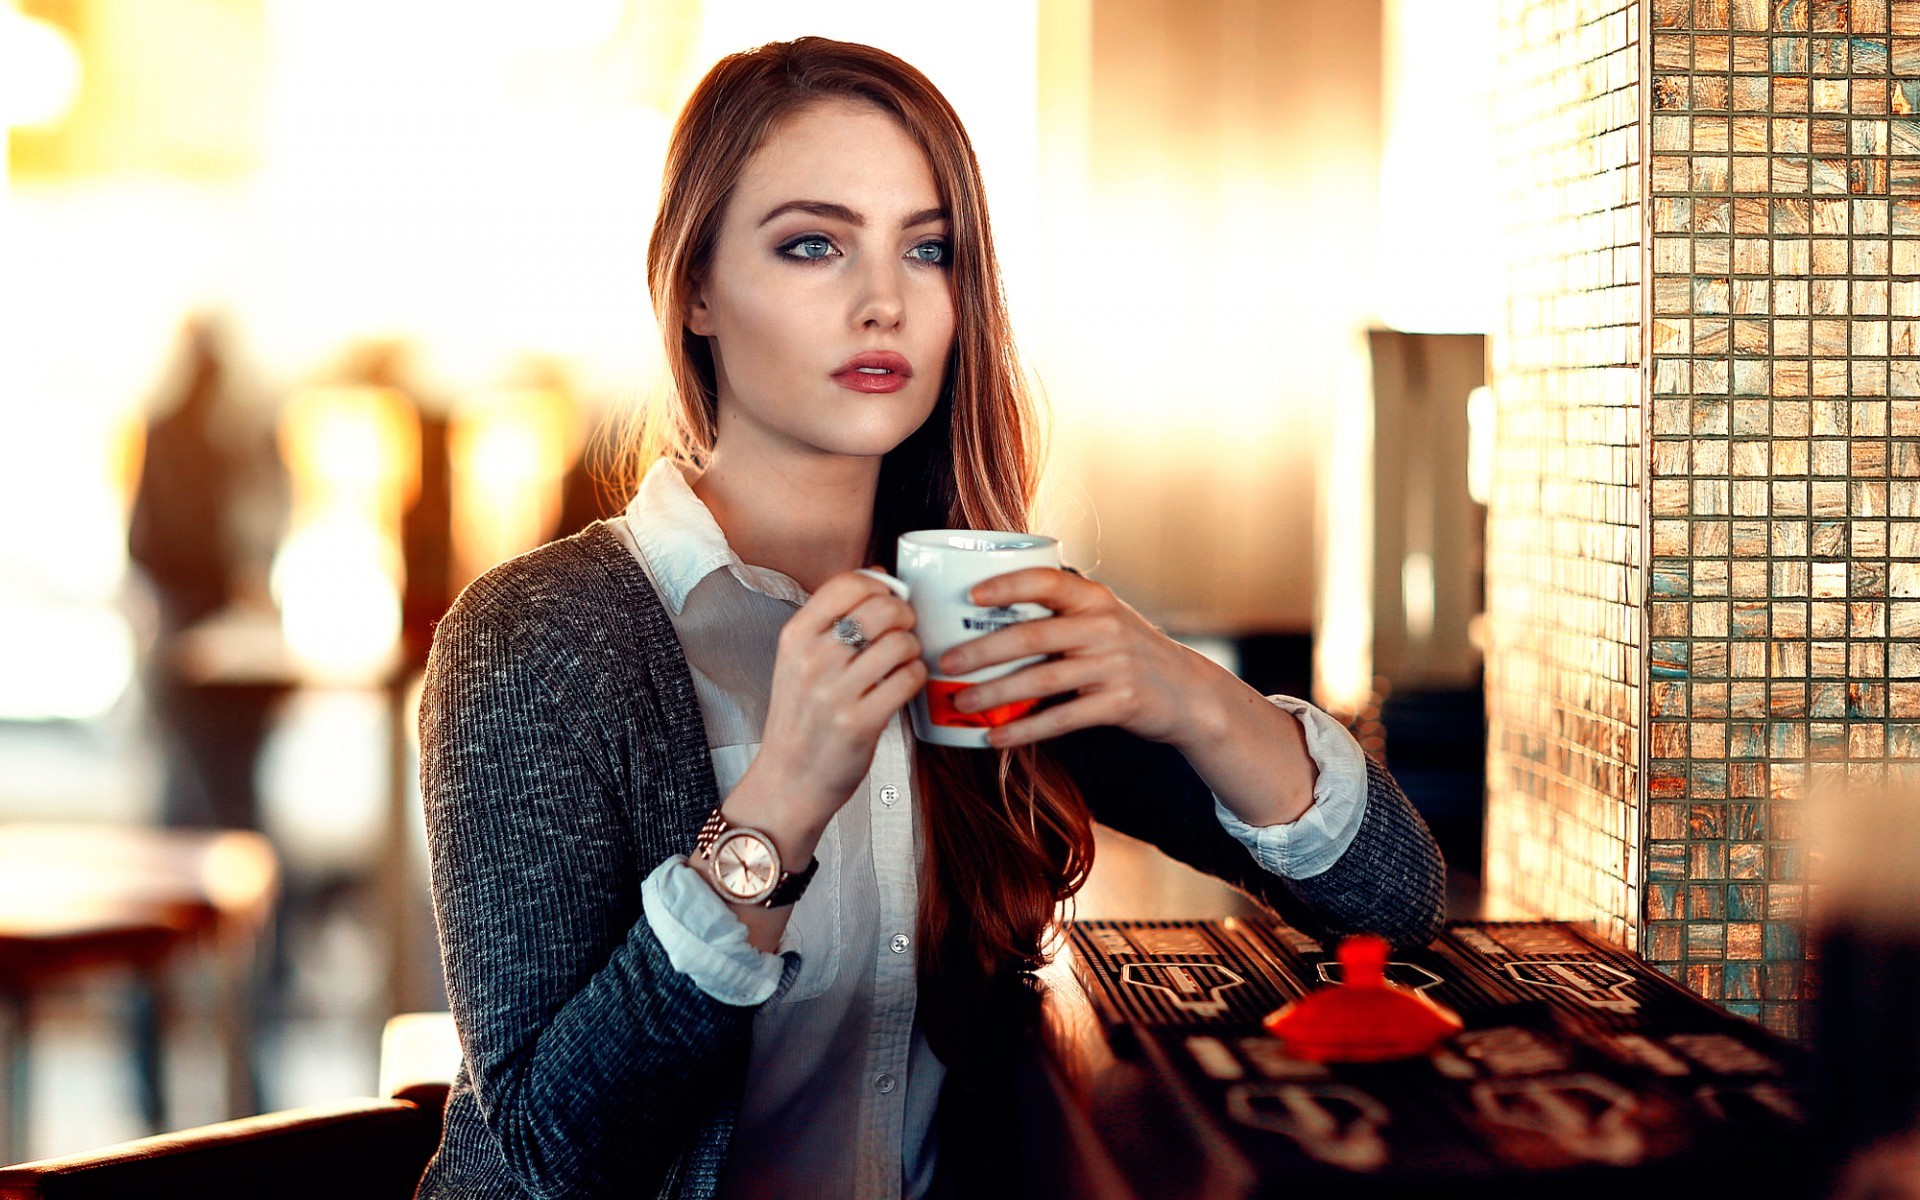 Women Model Redhead Long Hair Alessandro Di Cicco Cup Looking Away Blouses Sweater Blue Eyes Open Mo 1920x1200